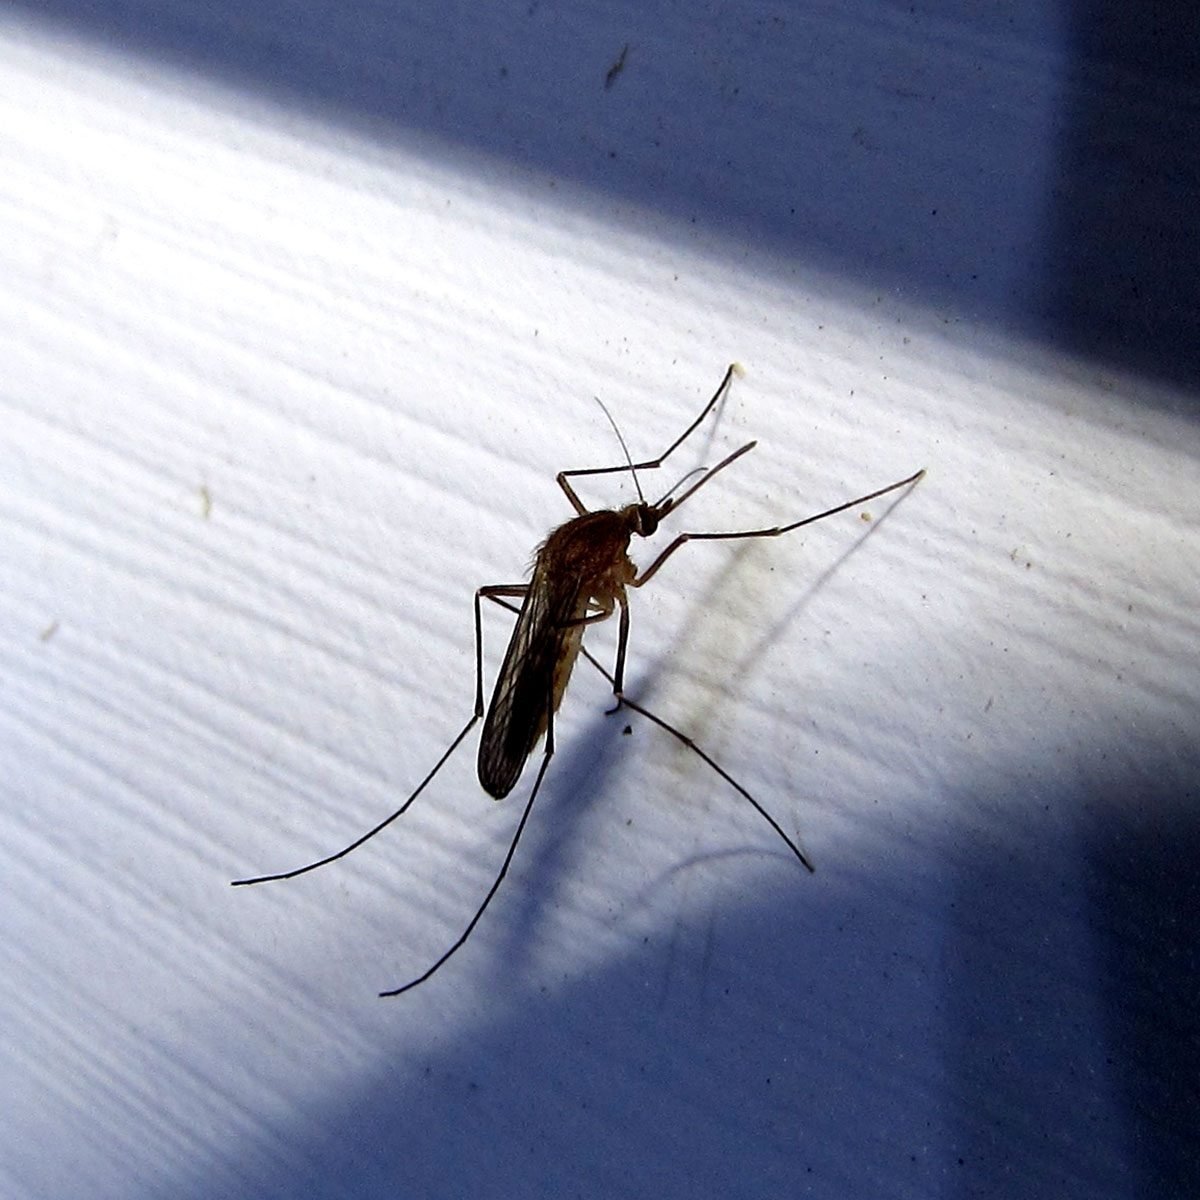 Expert Tips for Keeping Mosquitos Away This Summer